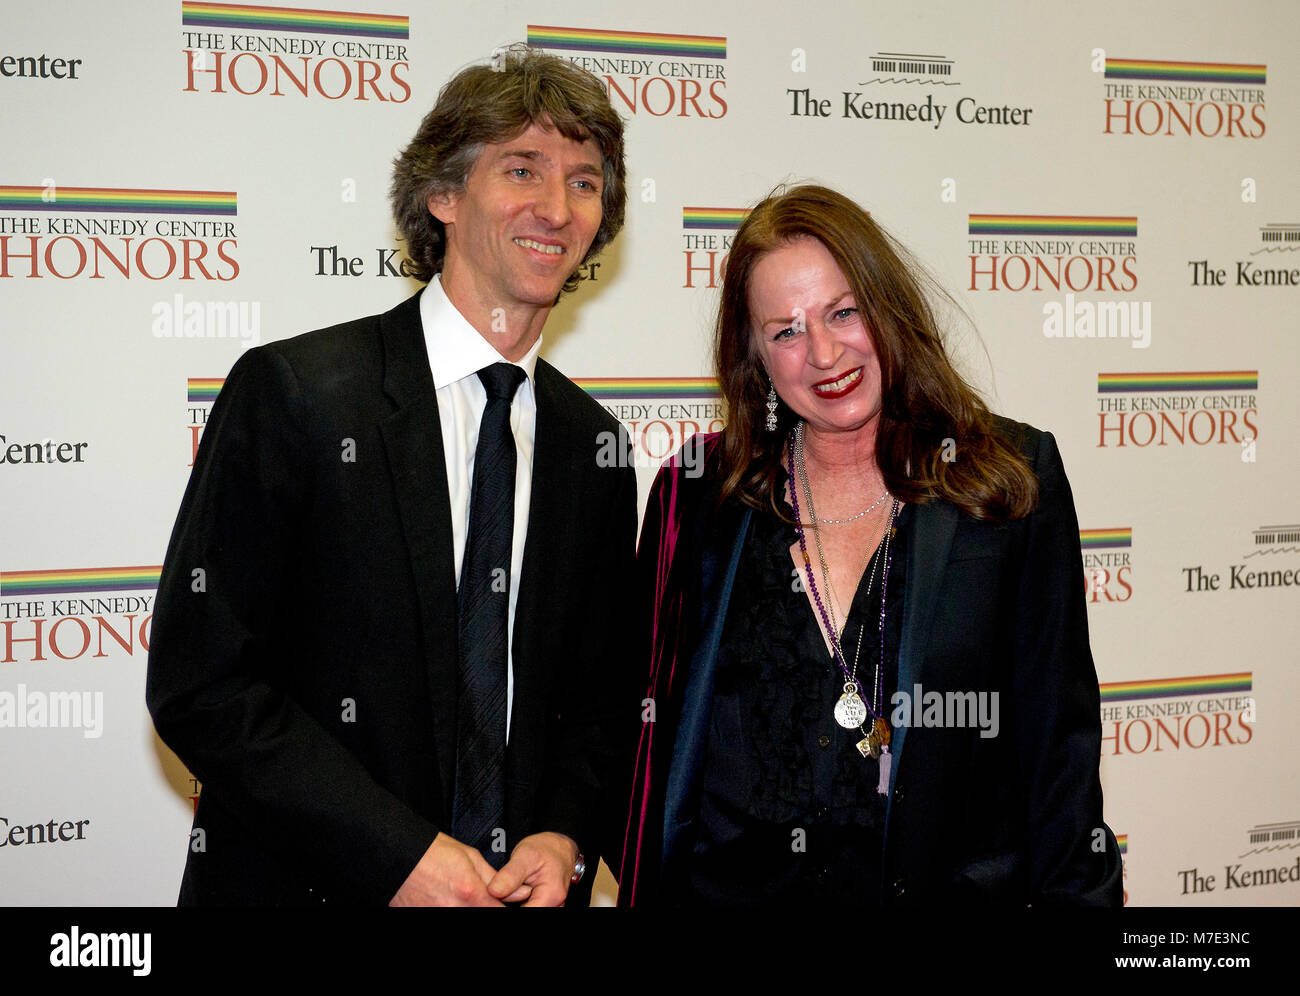 Damian Woetzel and Heather Watts arrive for the formal Artist's Dinner honoring the recipients of the 2012 Kennedy Center Honors hosted by United States Secretary of State Hillary Rodham Clinton at the U.S. Department of State in Washington, D.C. on Saturday, December 1, 2012. The 2012 honorees are Buddy Guy, actor Dustin Hoffman, late-night host David Letterman, dancer Natalia Makarova, and the British rock band Led Zeppelin (Robert Plant, Jimmy Page, and John Paul Jones). Credit: Ron Sachs / CNP /MediaPunch Stock Photo